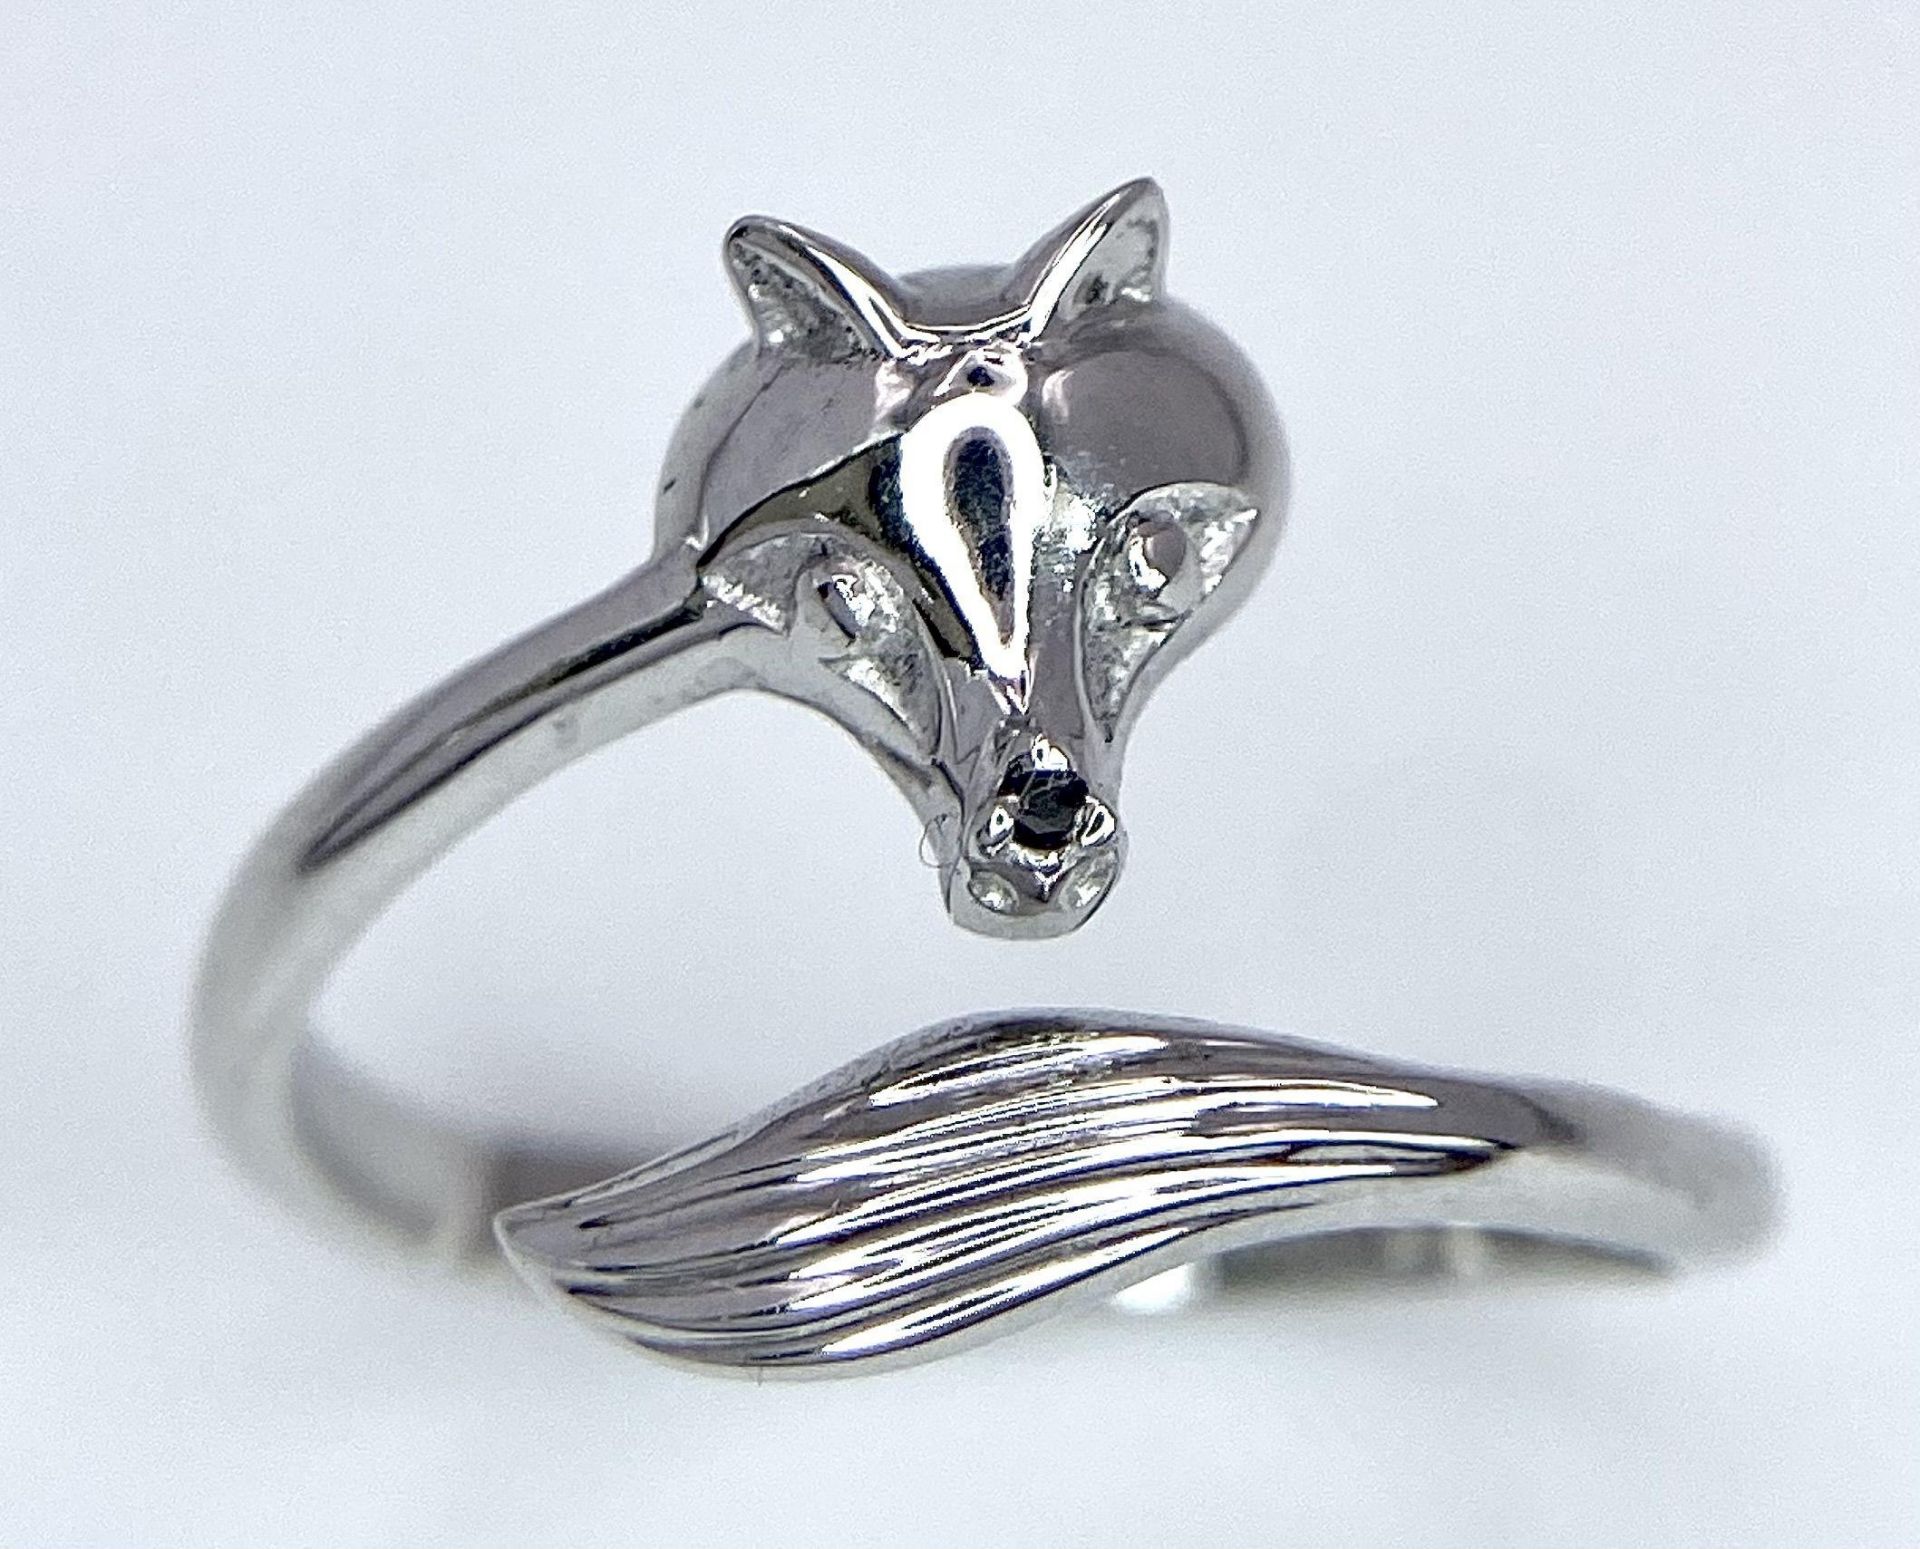 A Limited Edition (1 of 435) Sterling Silver and African Black Diamond Set ‘Fox’ Design Ring Size